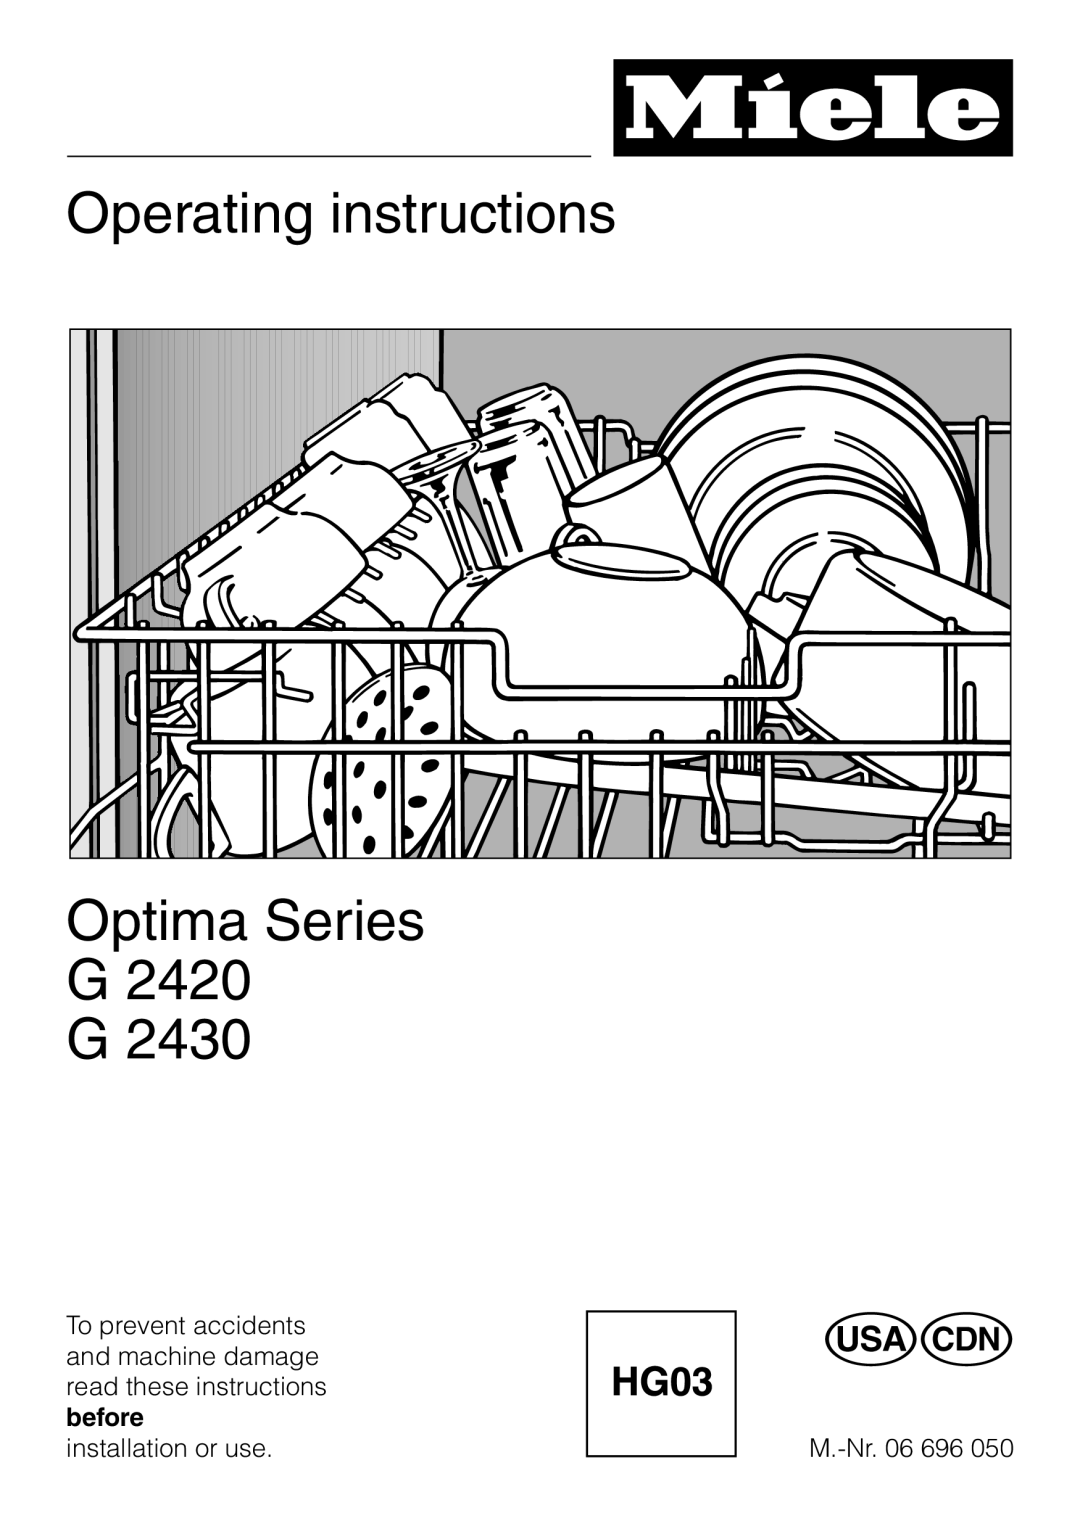 Miele G 2420 G 2430 operating instructions Operating instructions Optima Series G2420 G2430 